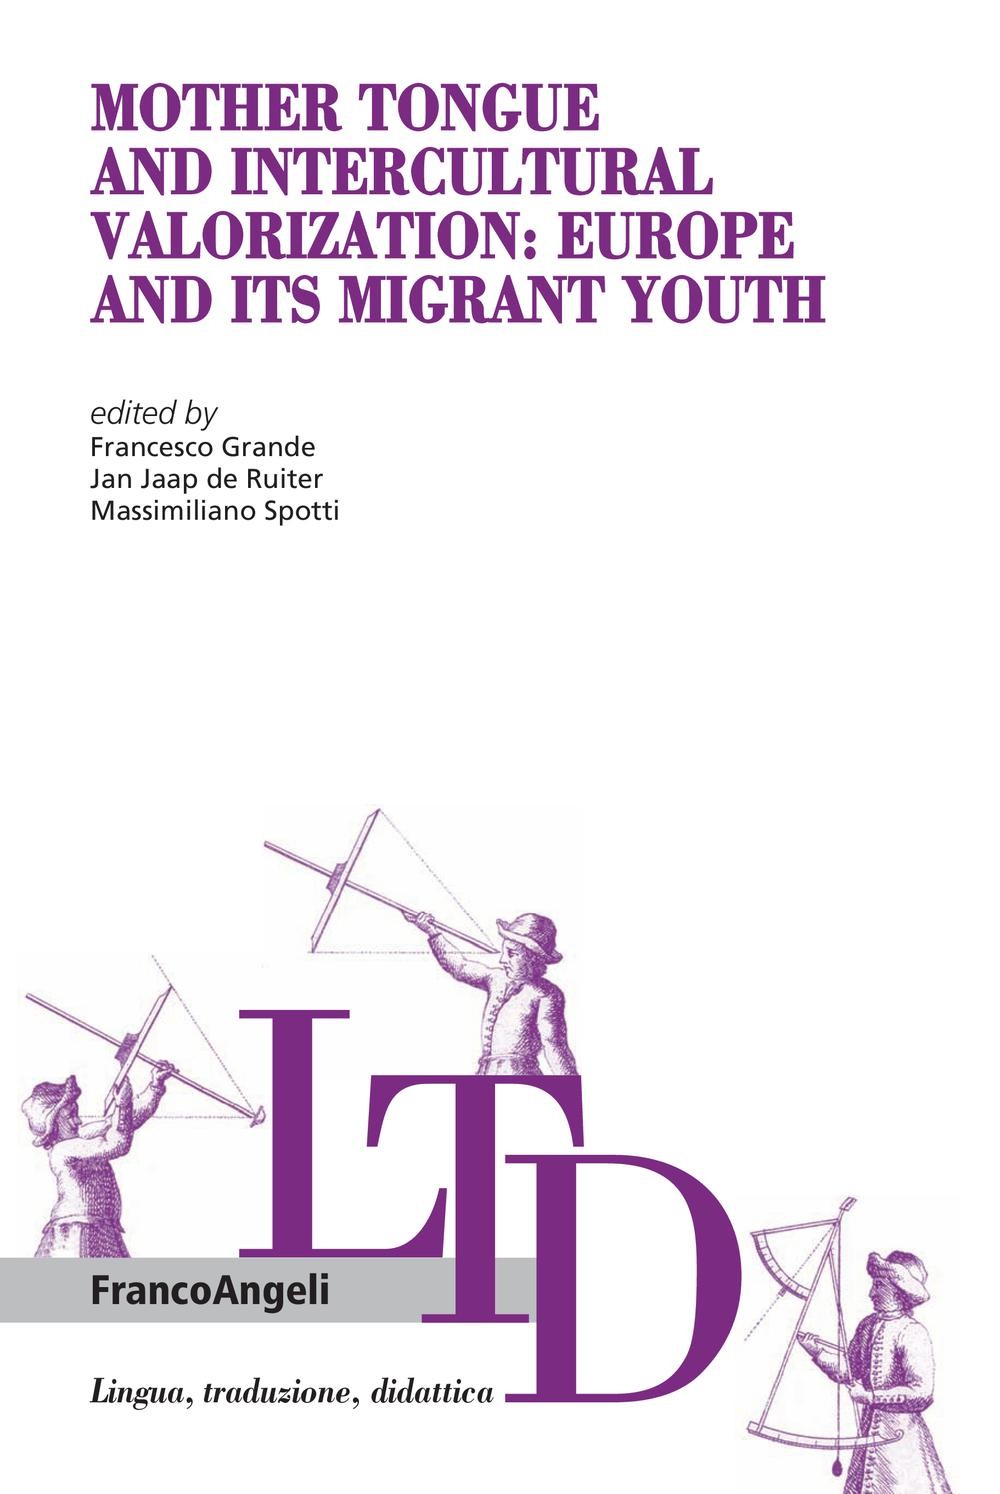 Mother Tongue and Intercultural Valorization: Europe and its migrant youth - Librerie.coop